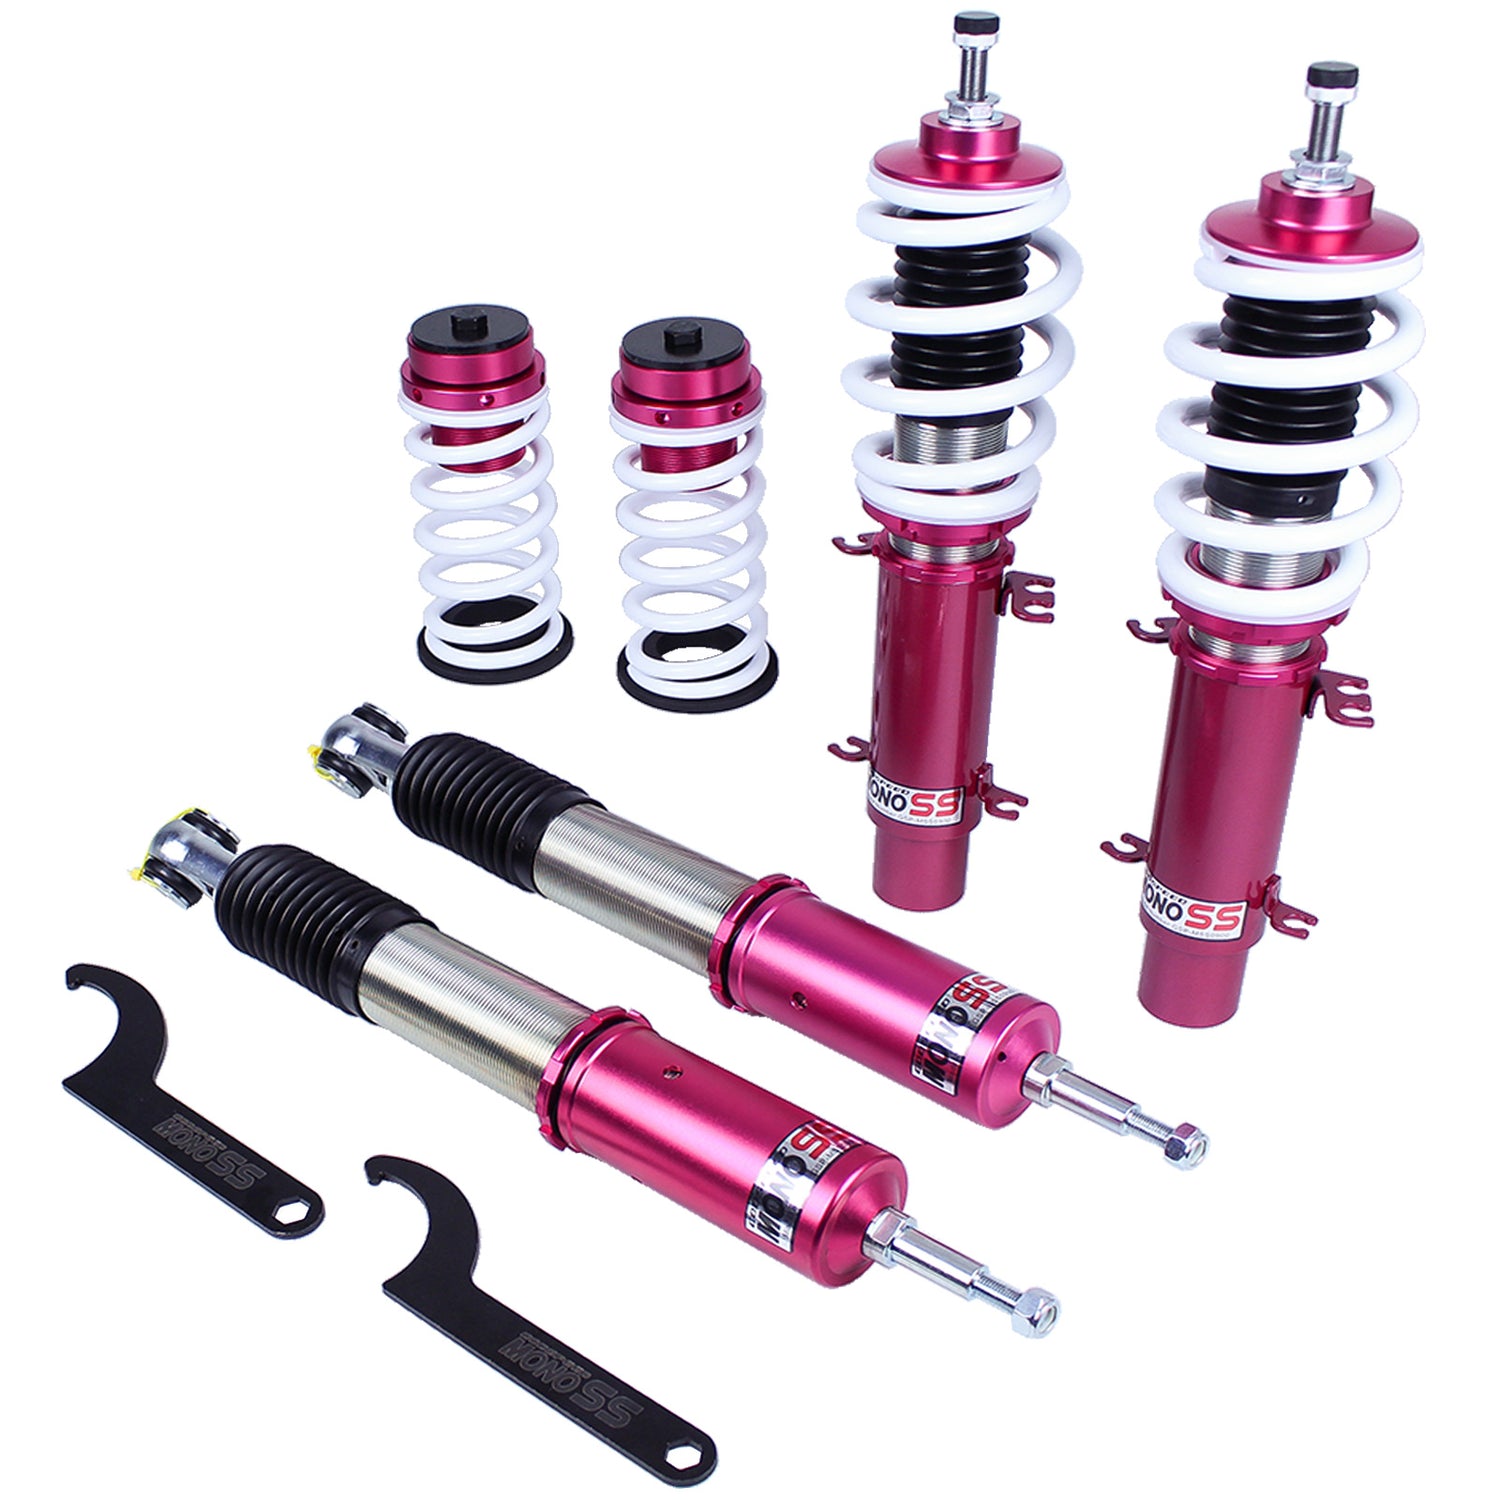 Godspeed MSS0900-A MonoSS Coilover Lowering Kit, Fully Adjustable, Ride Height, Spring Tension And 16 Click Damping, Volkswagen Golf(MK4) 1999-05